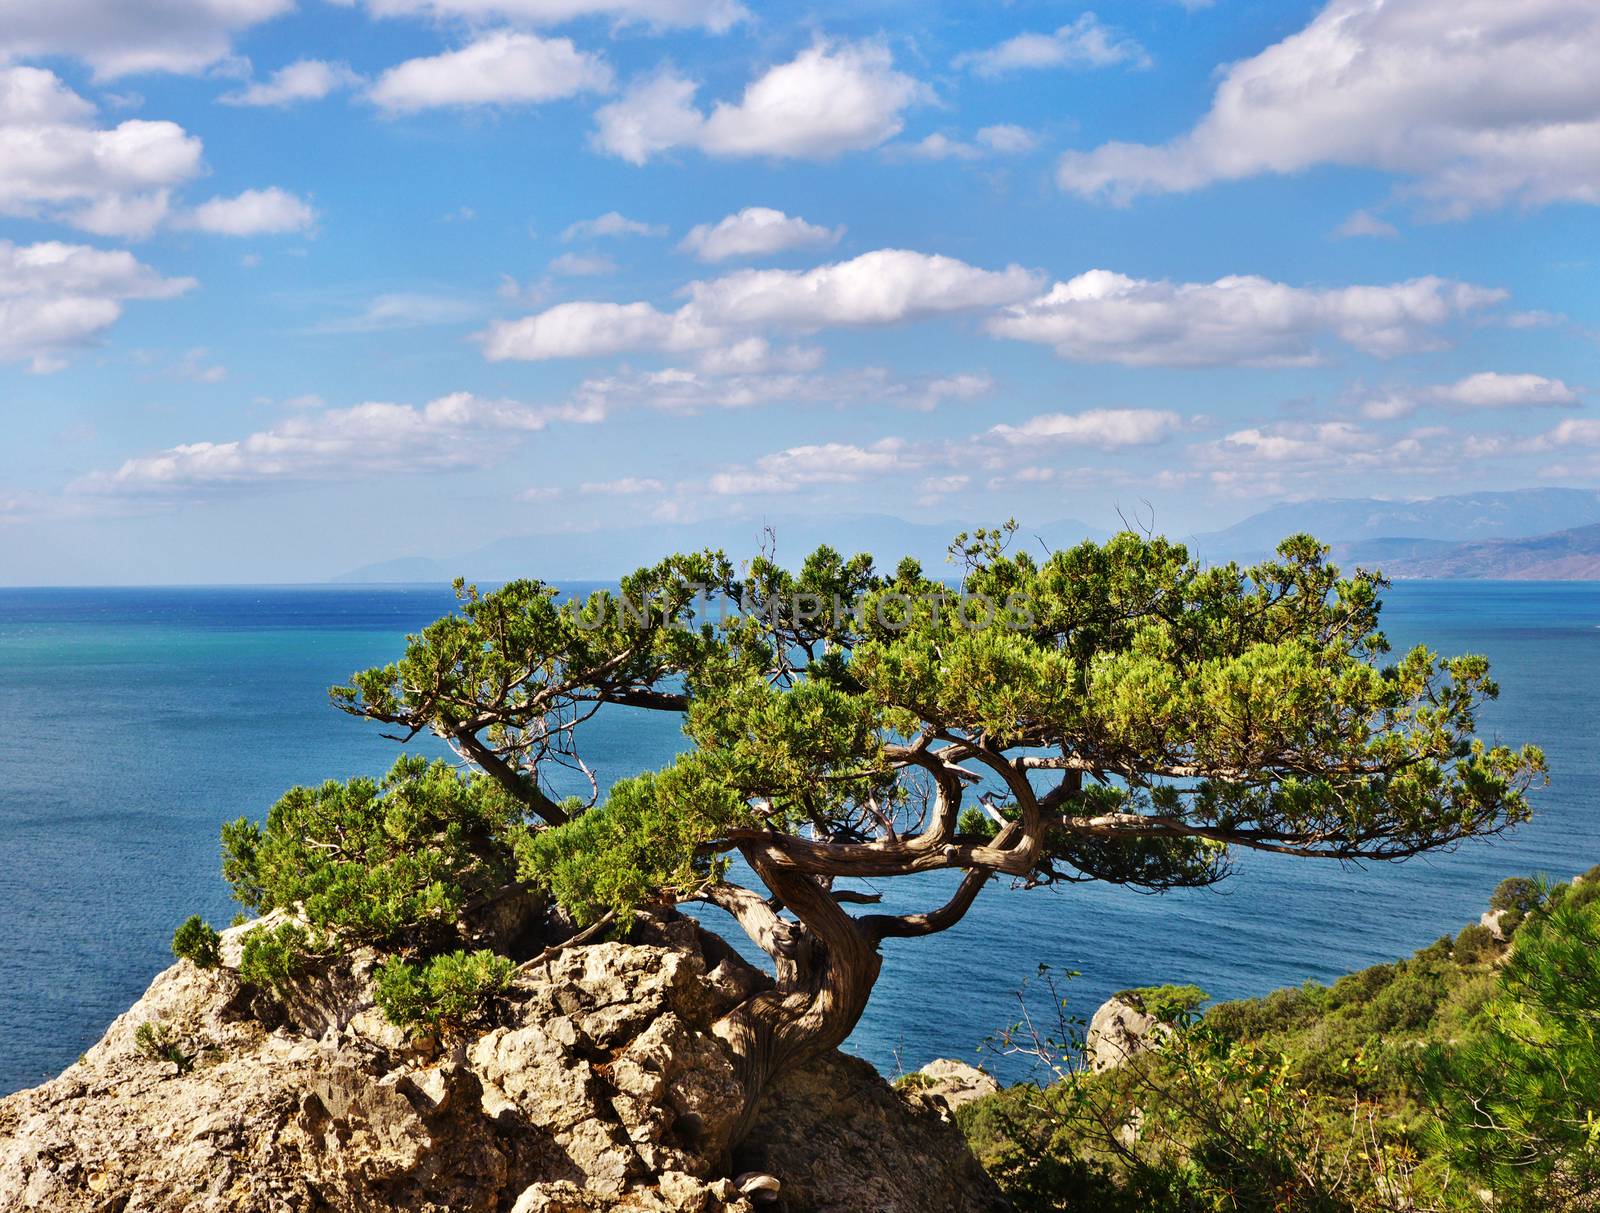 mountain trees on the background of sea and blue sky